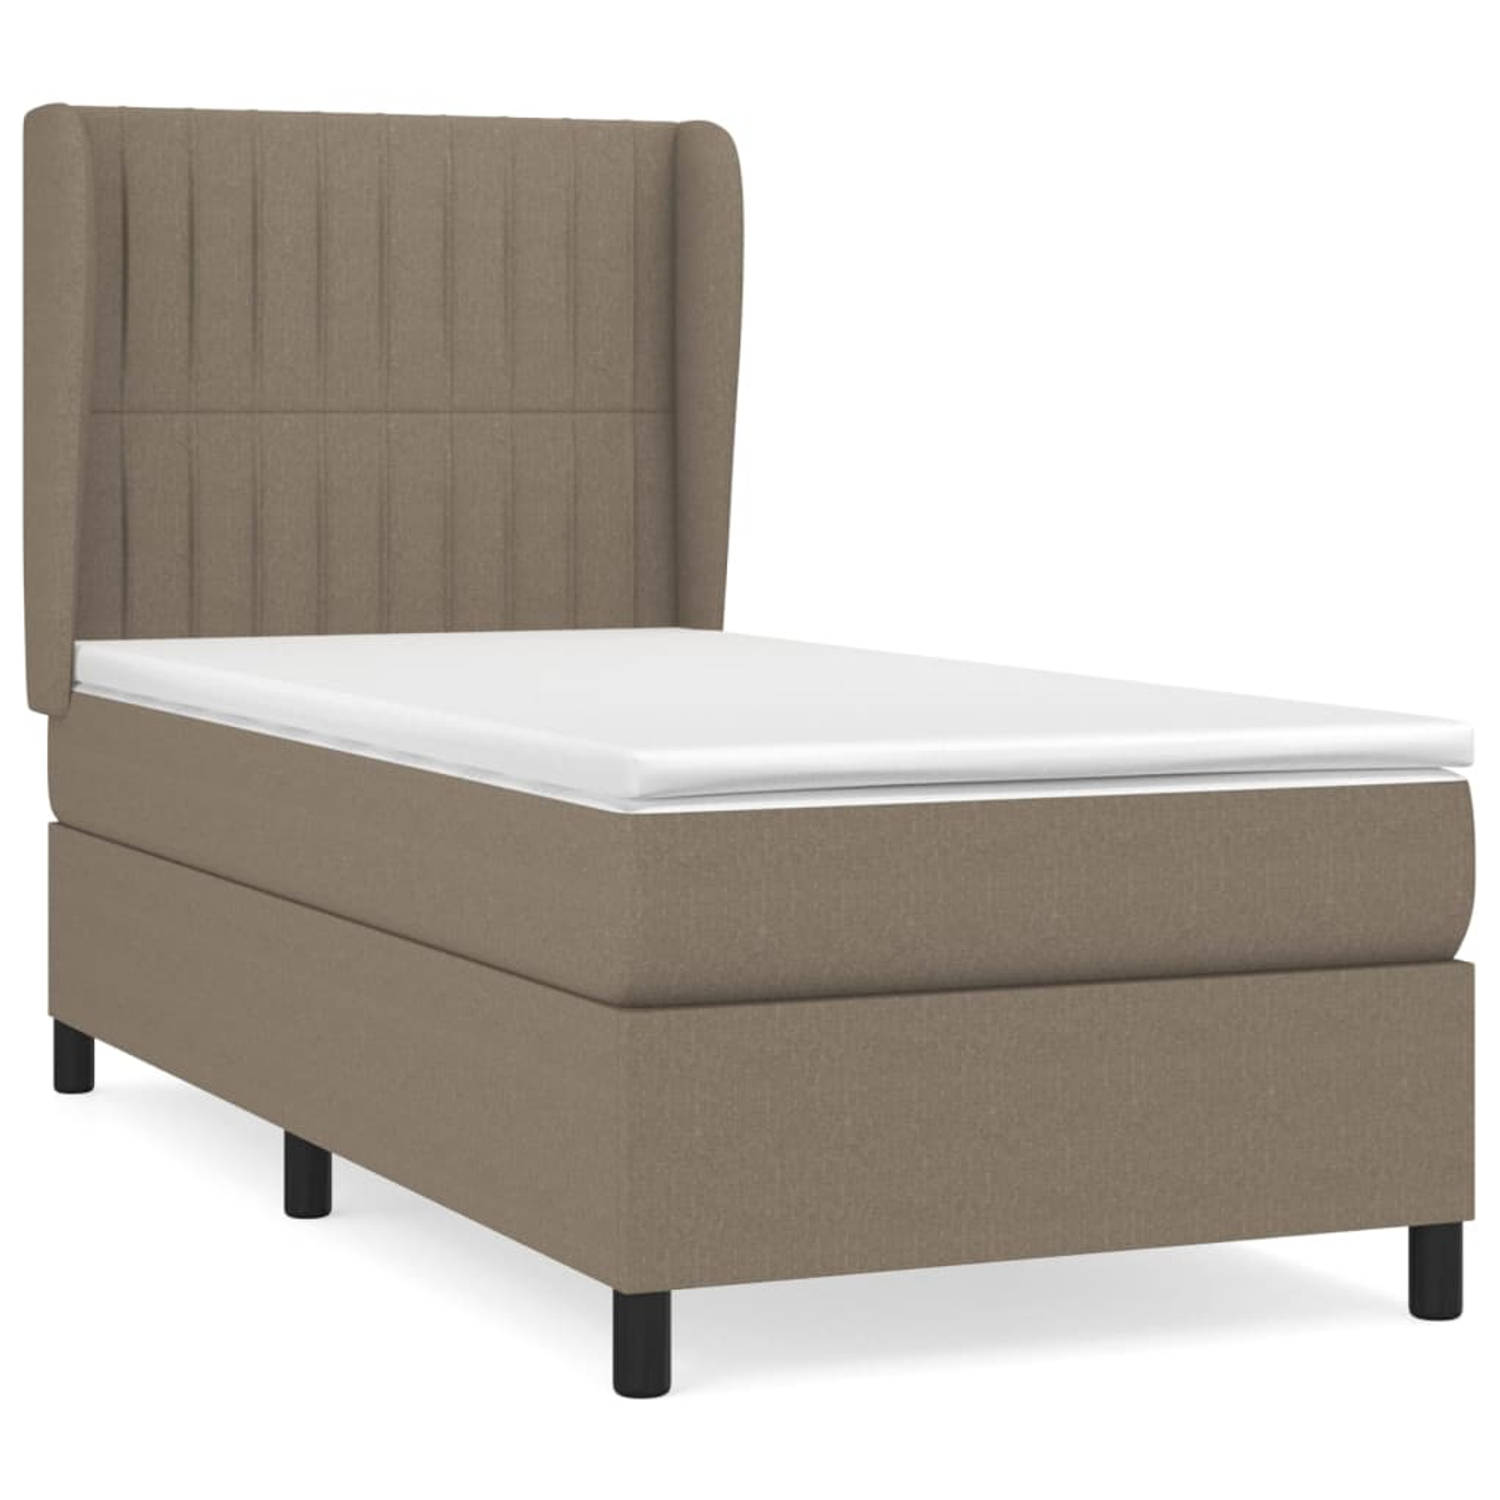 The Living Store Boxspring met matras stof taupe 90x190 cm - Boxspring - Boxsprings - Bed - Slaapmeubel - Boxspringbed - Boxspring Bed - Tweepersoonsbed - Bed Met Matras - Bedframe